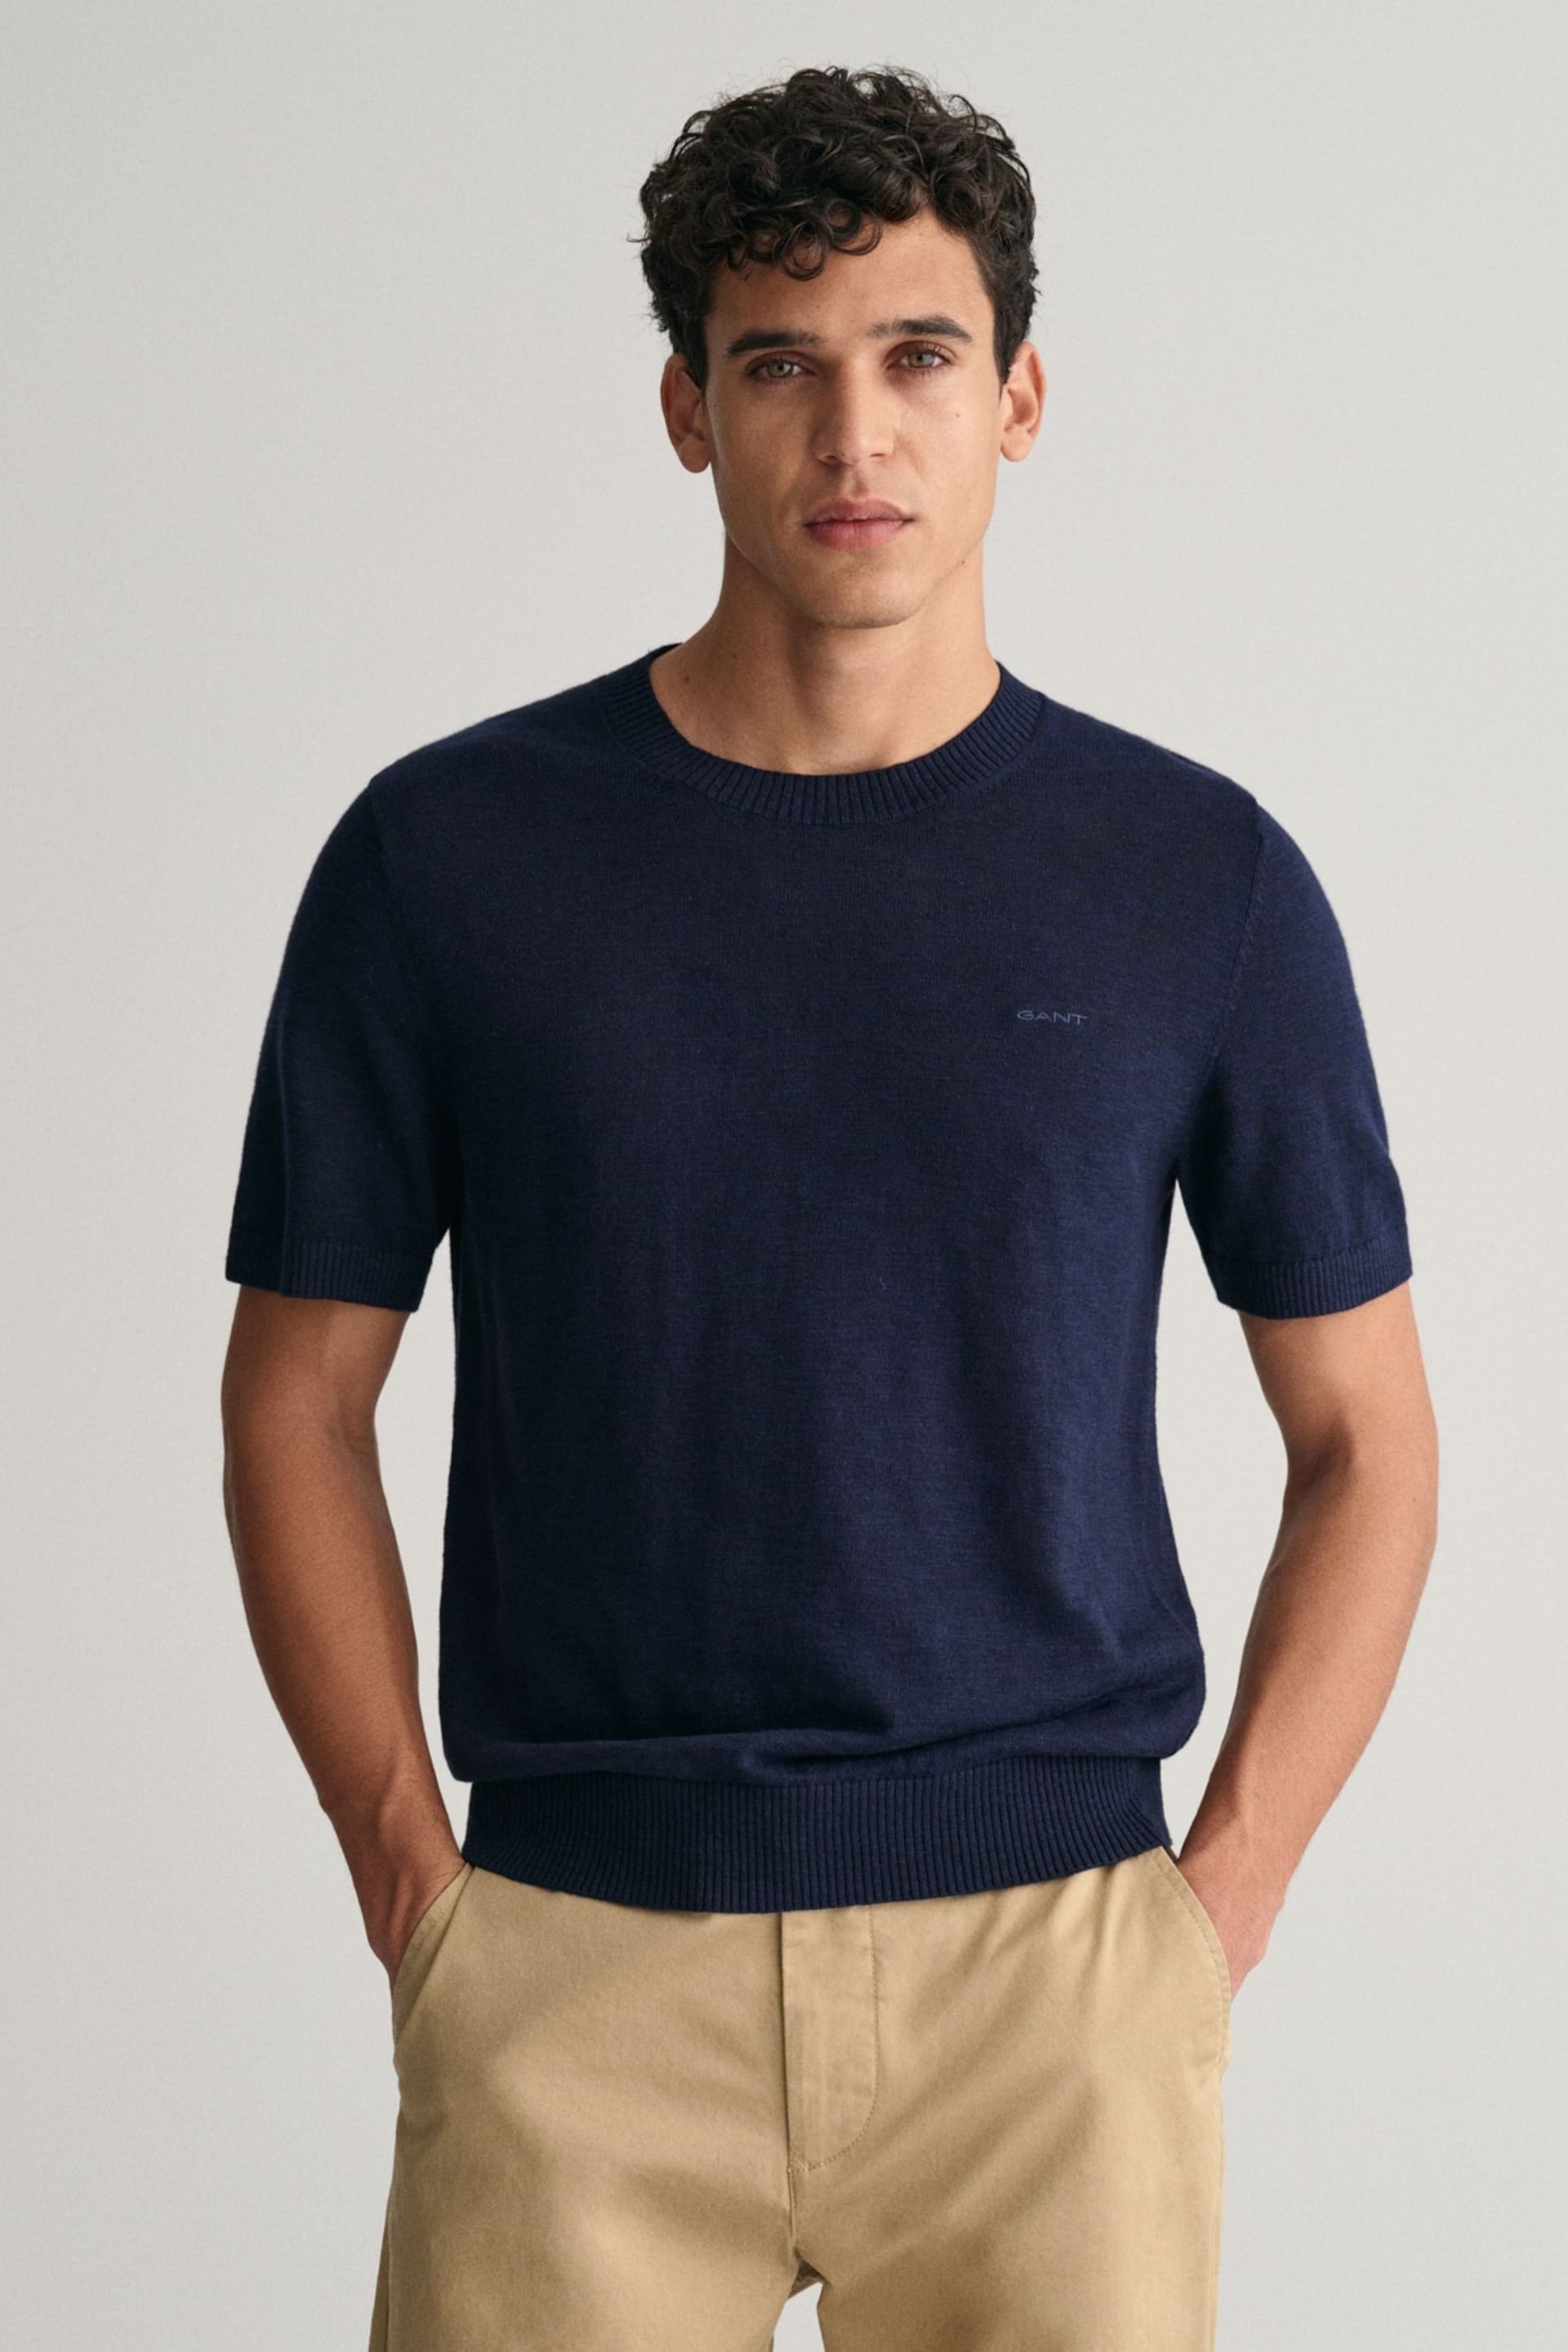 GANT Knitted Cotton Linen T-Shirt - Image 1 of 5